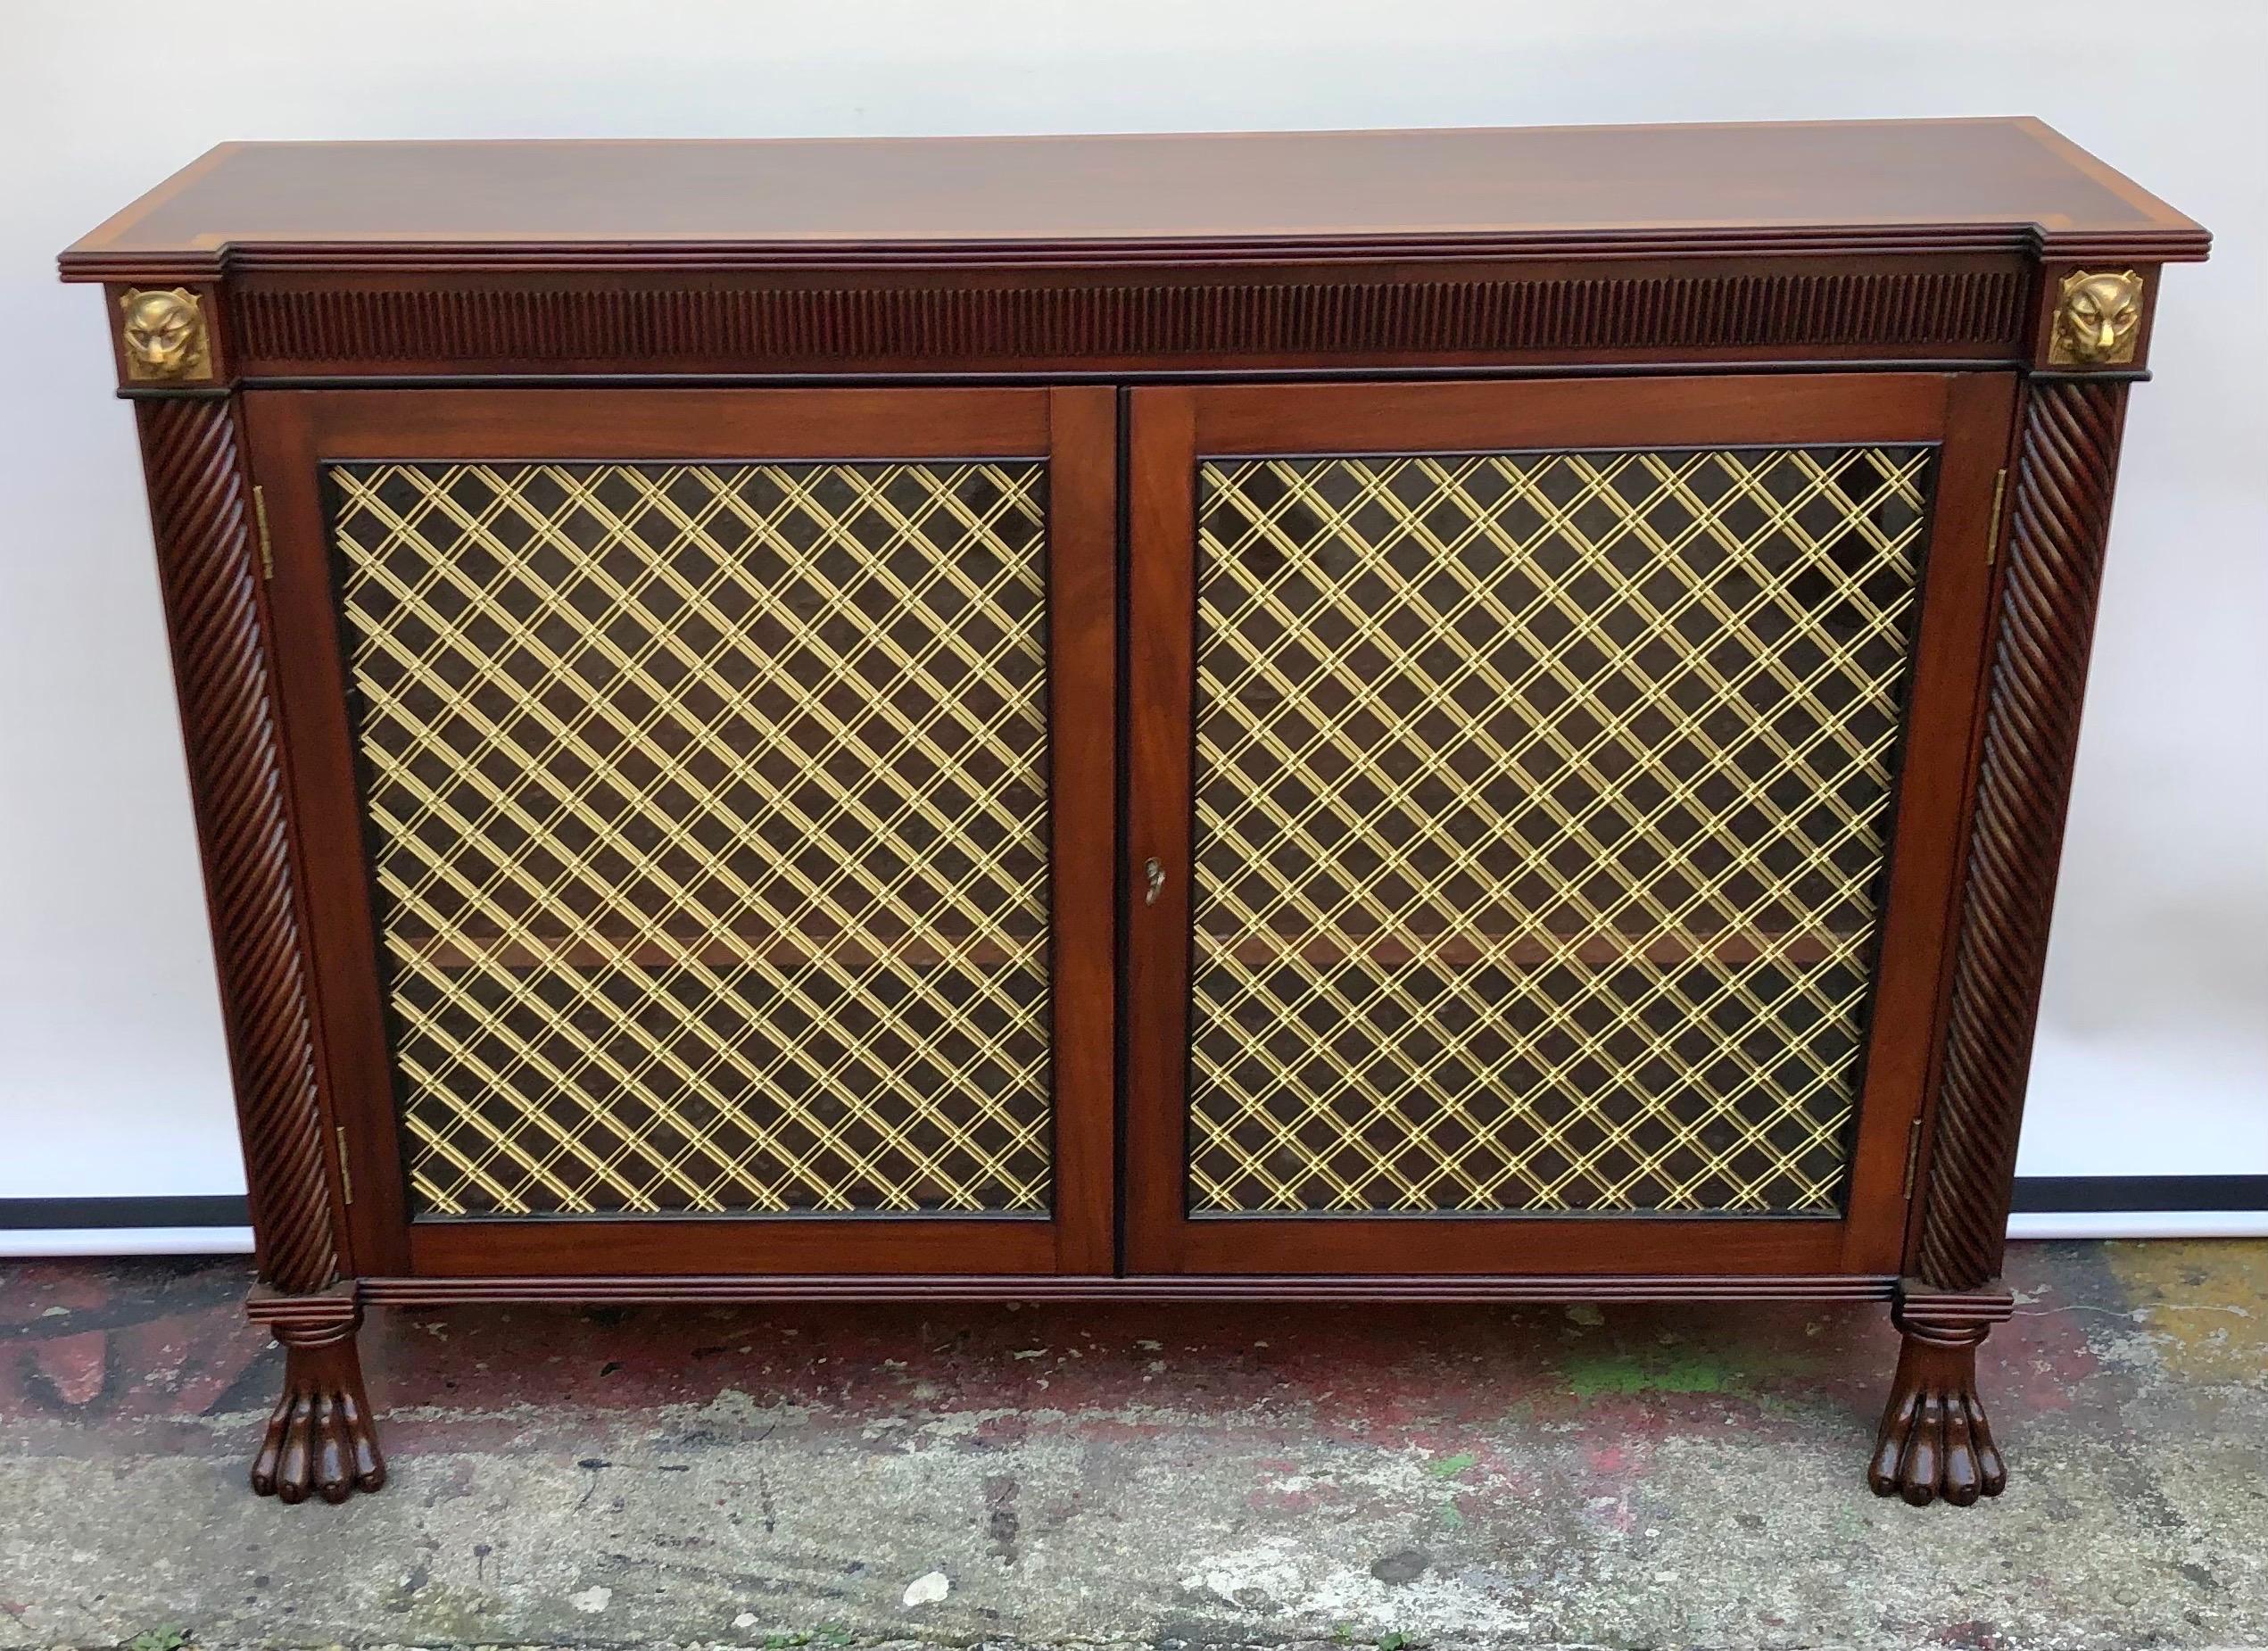 This Regal English Regency mahogany two door credenza / side cabinet is made in the early 19th Century using fine Cuban Mahogany with Gilt Bronze Mounts. The Regency Credenza top is made from one solid mahogany board with reeded edges and veneered